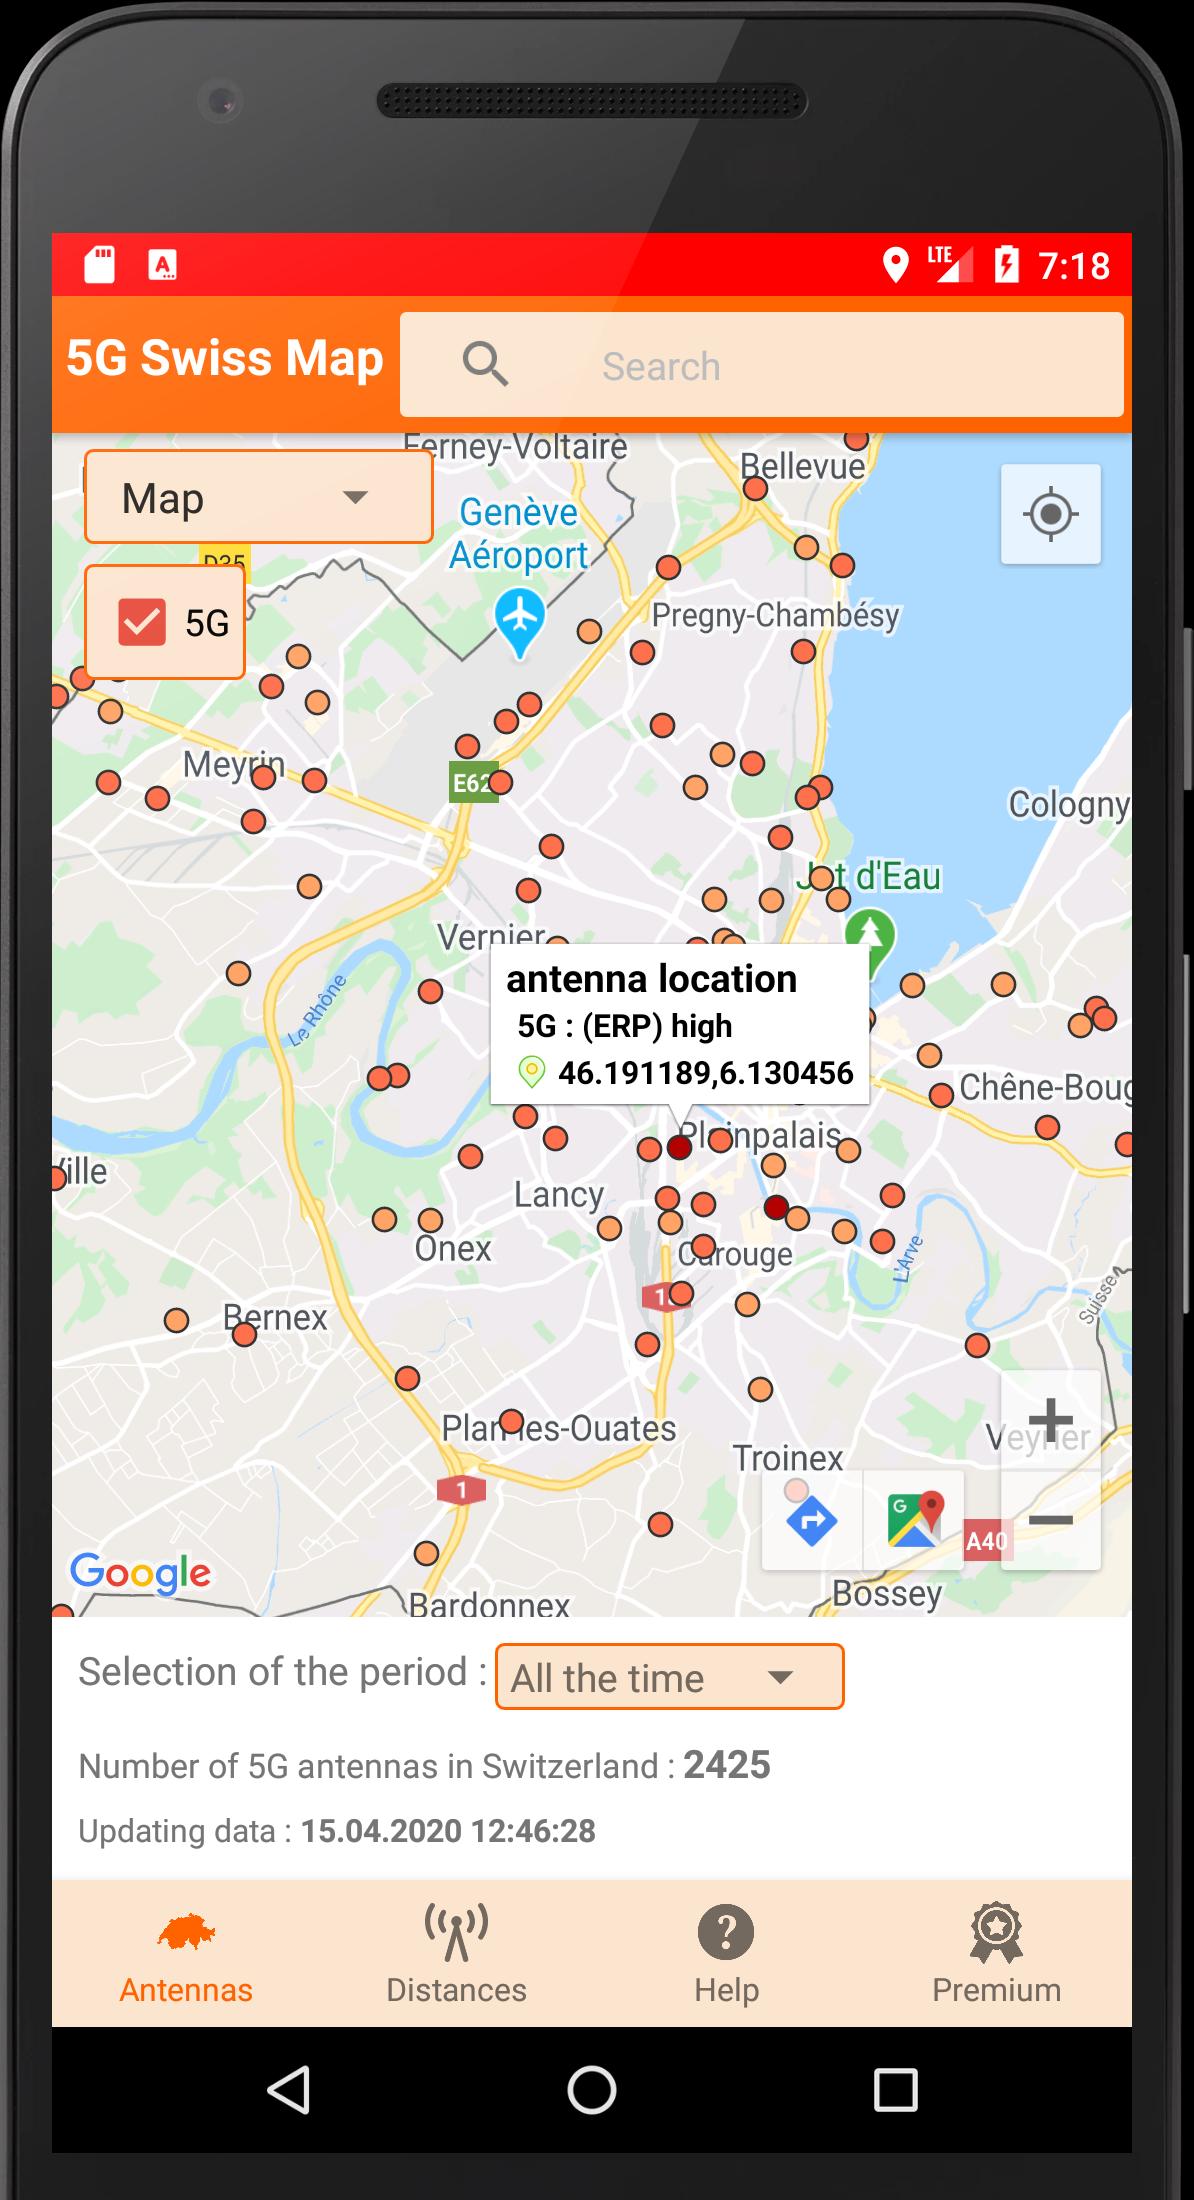 5G Swiss Map for Android - APK Download